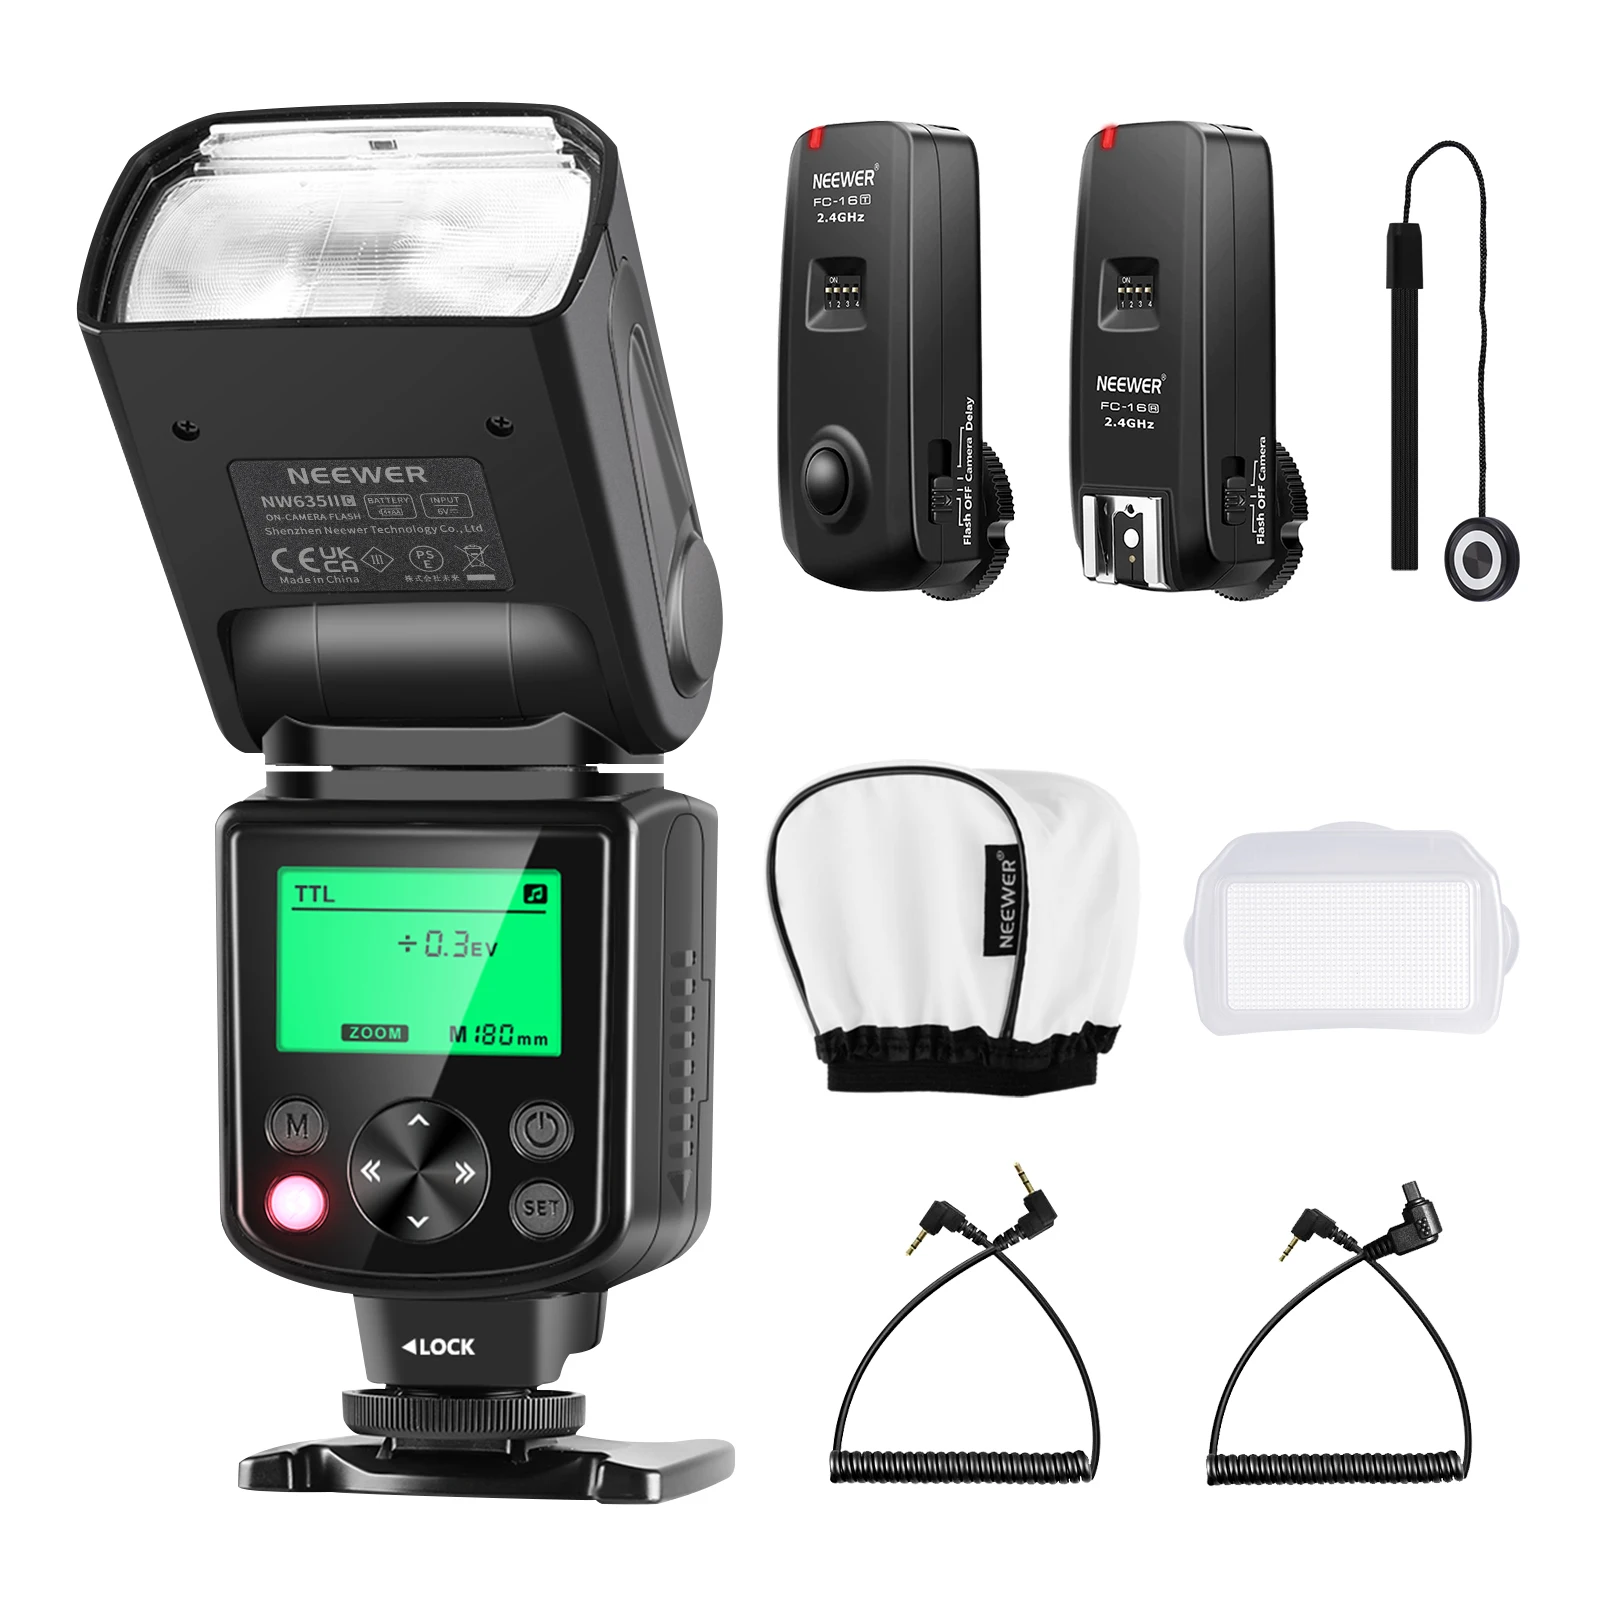 

NEEWER Upgraded NW635II-C TTL Camera Flash Speedlite with FC-16 Trigger, Diffuser, Lens Cap Holder, Compatible with Canon EOS